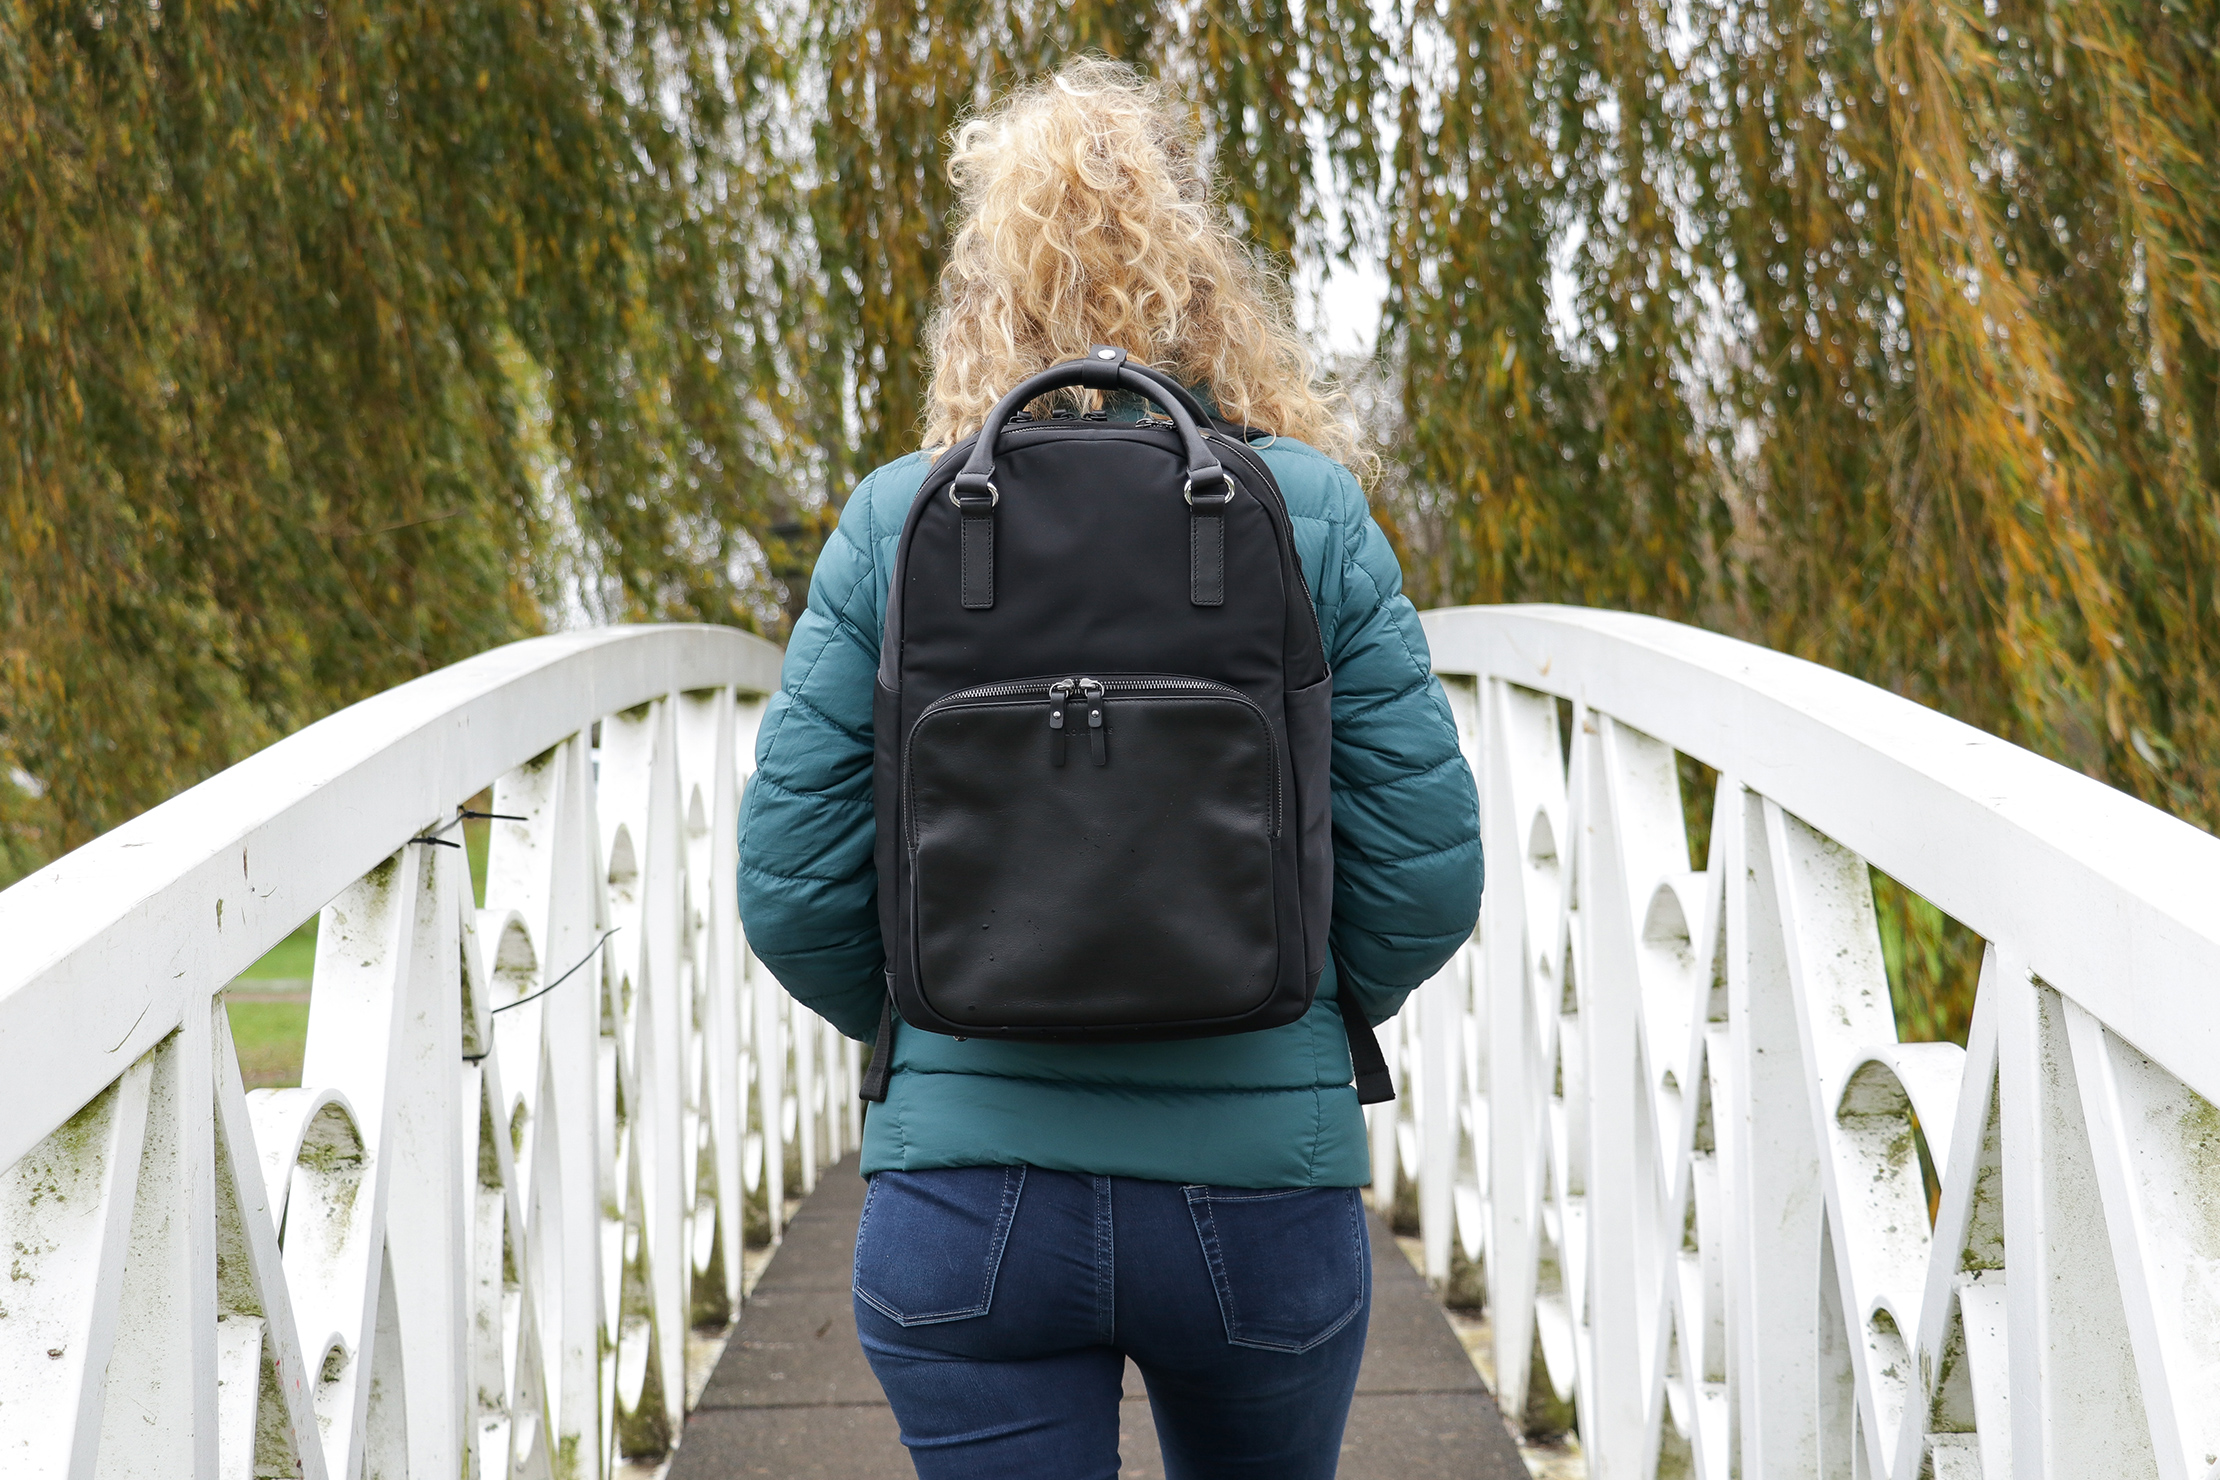 Lo & Sons: The Beacon - Women's Laptop Backpack in Black/Gold/Lavender